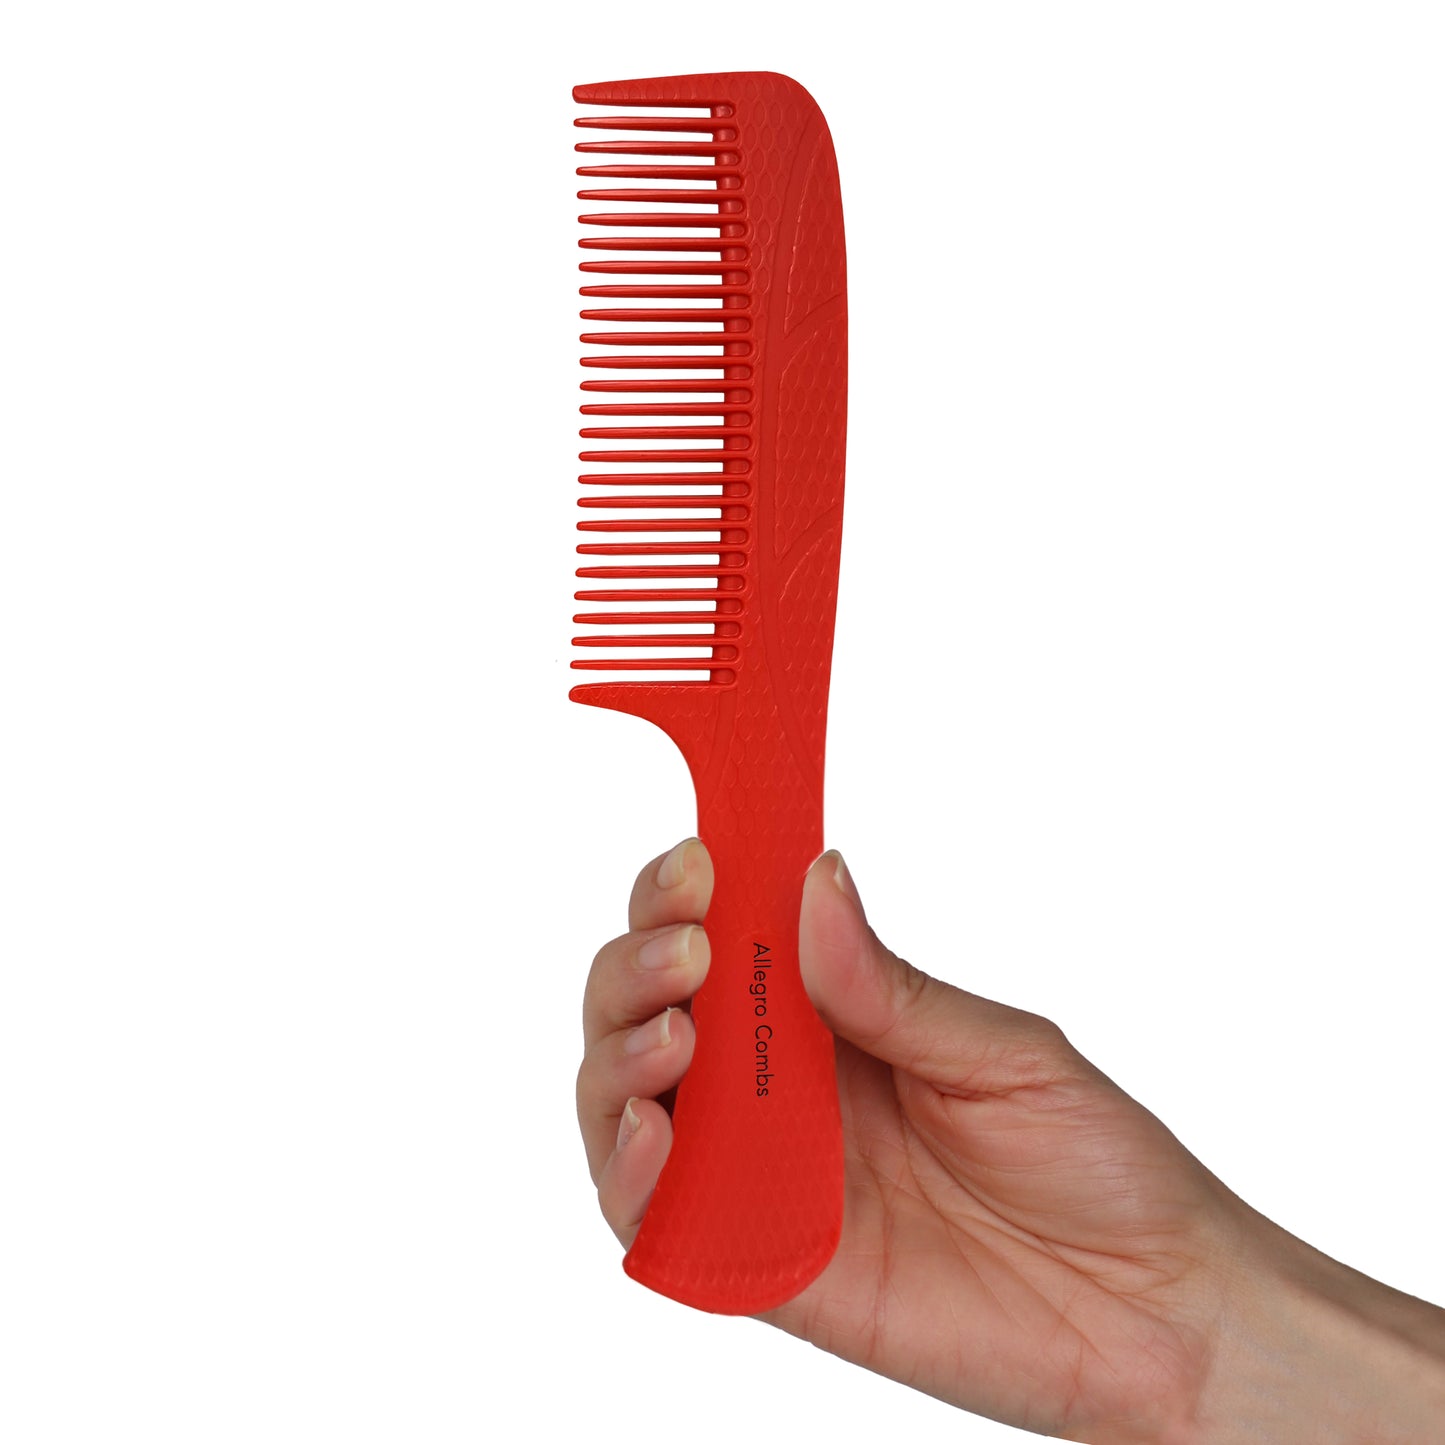 Allegro Comb 1004 Wide Tooth Detangling Hair Combs For Women Texture 1 Count